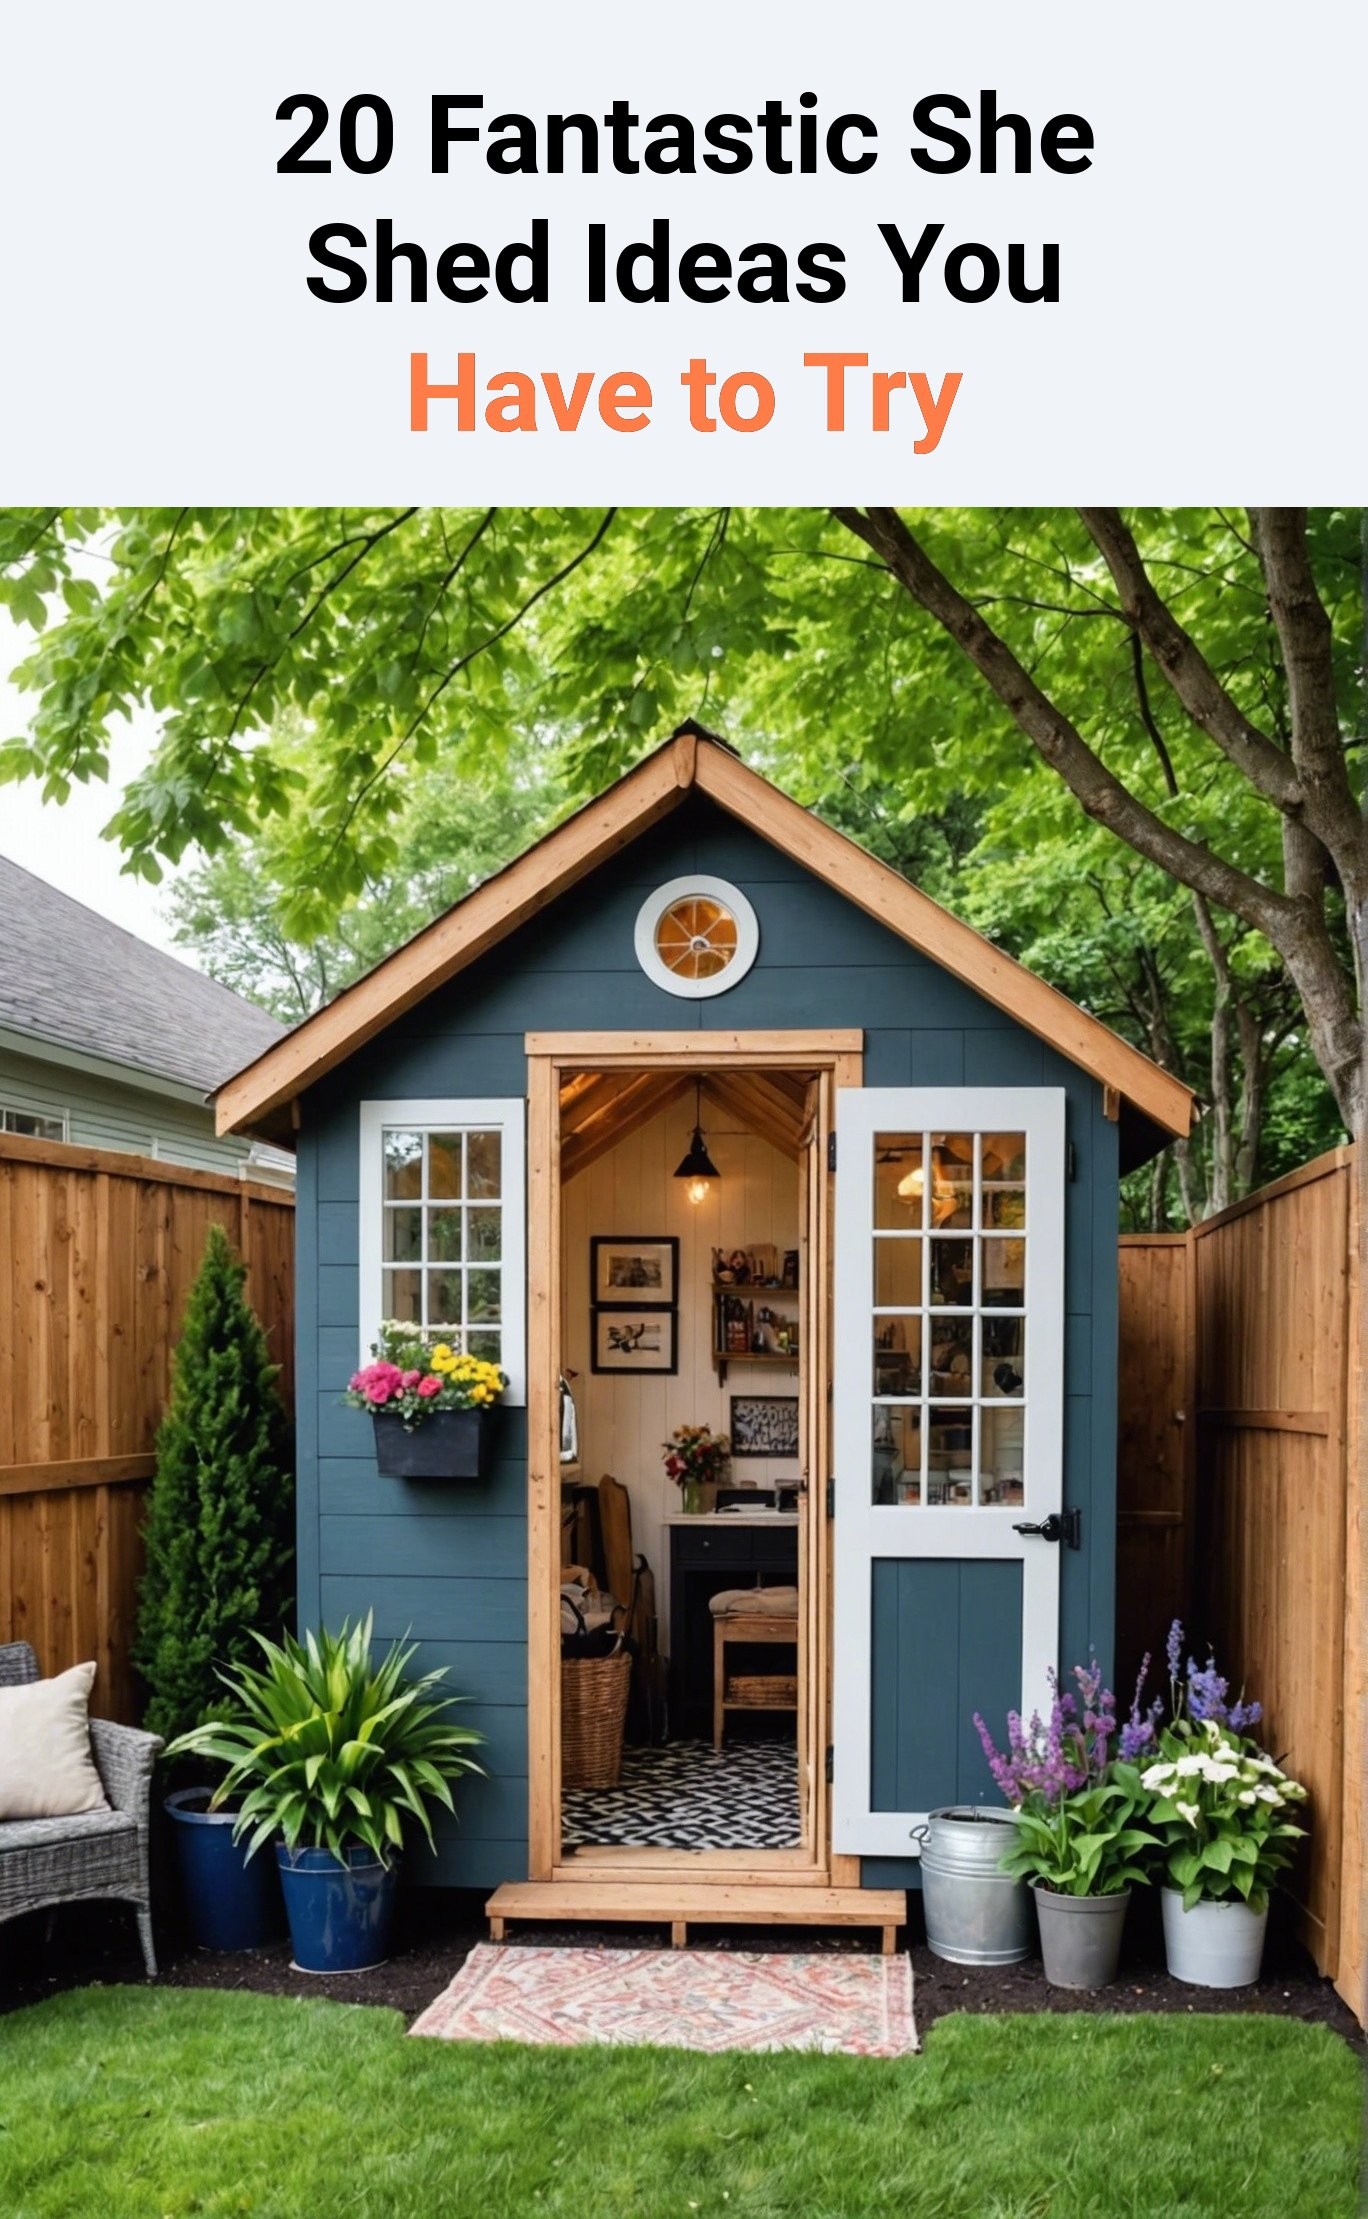 20 Fantastic She Shed Ideas You Have to Try